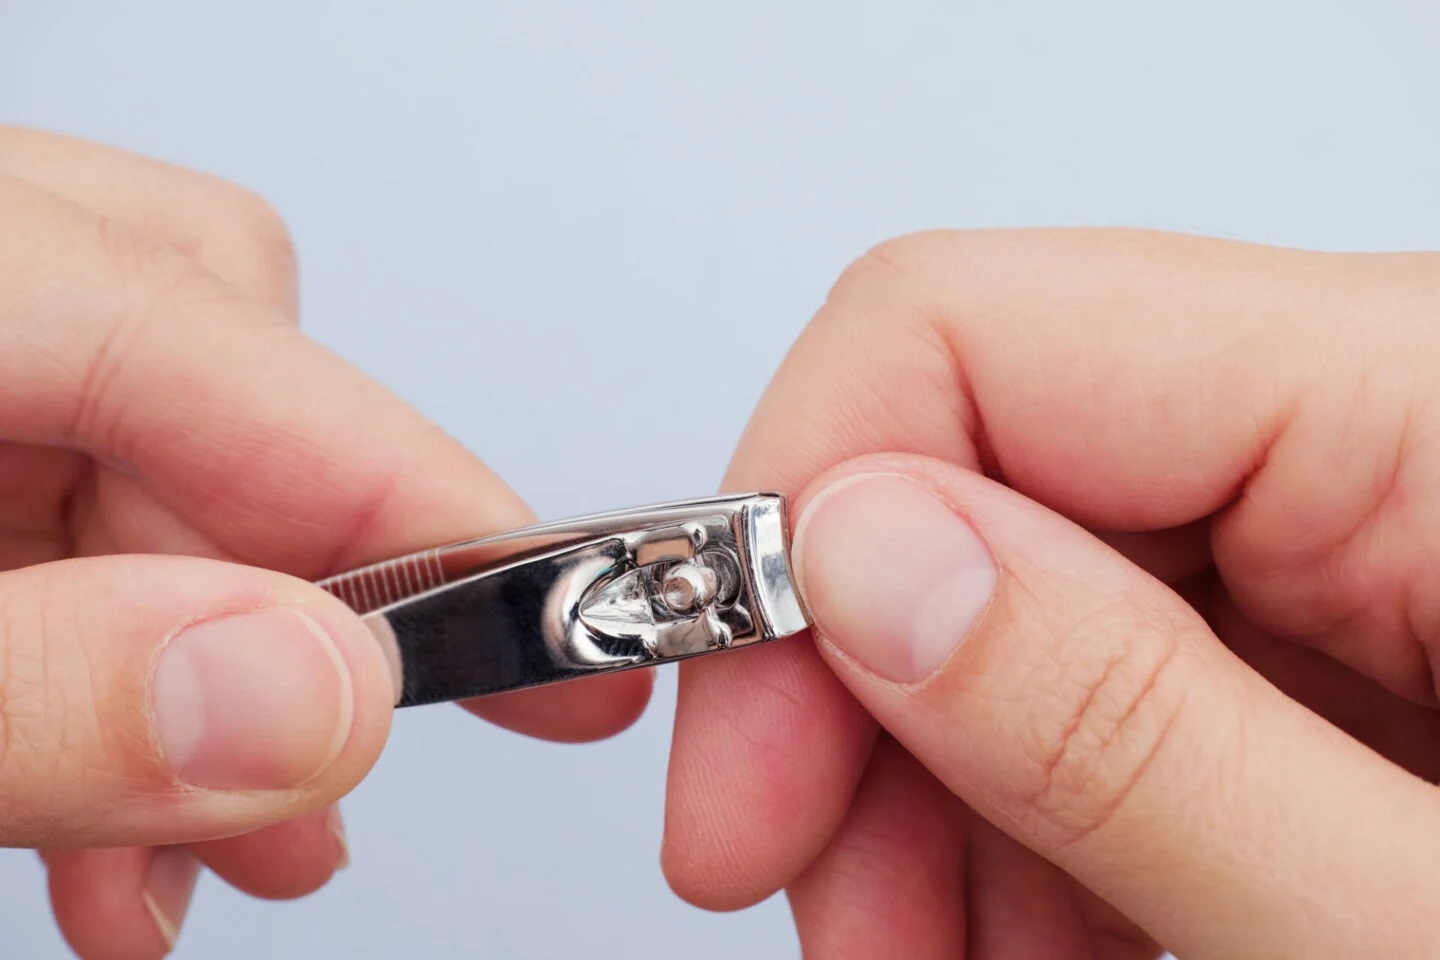 How To Sharpen Nail Clippers With Sandpaper